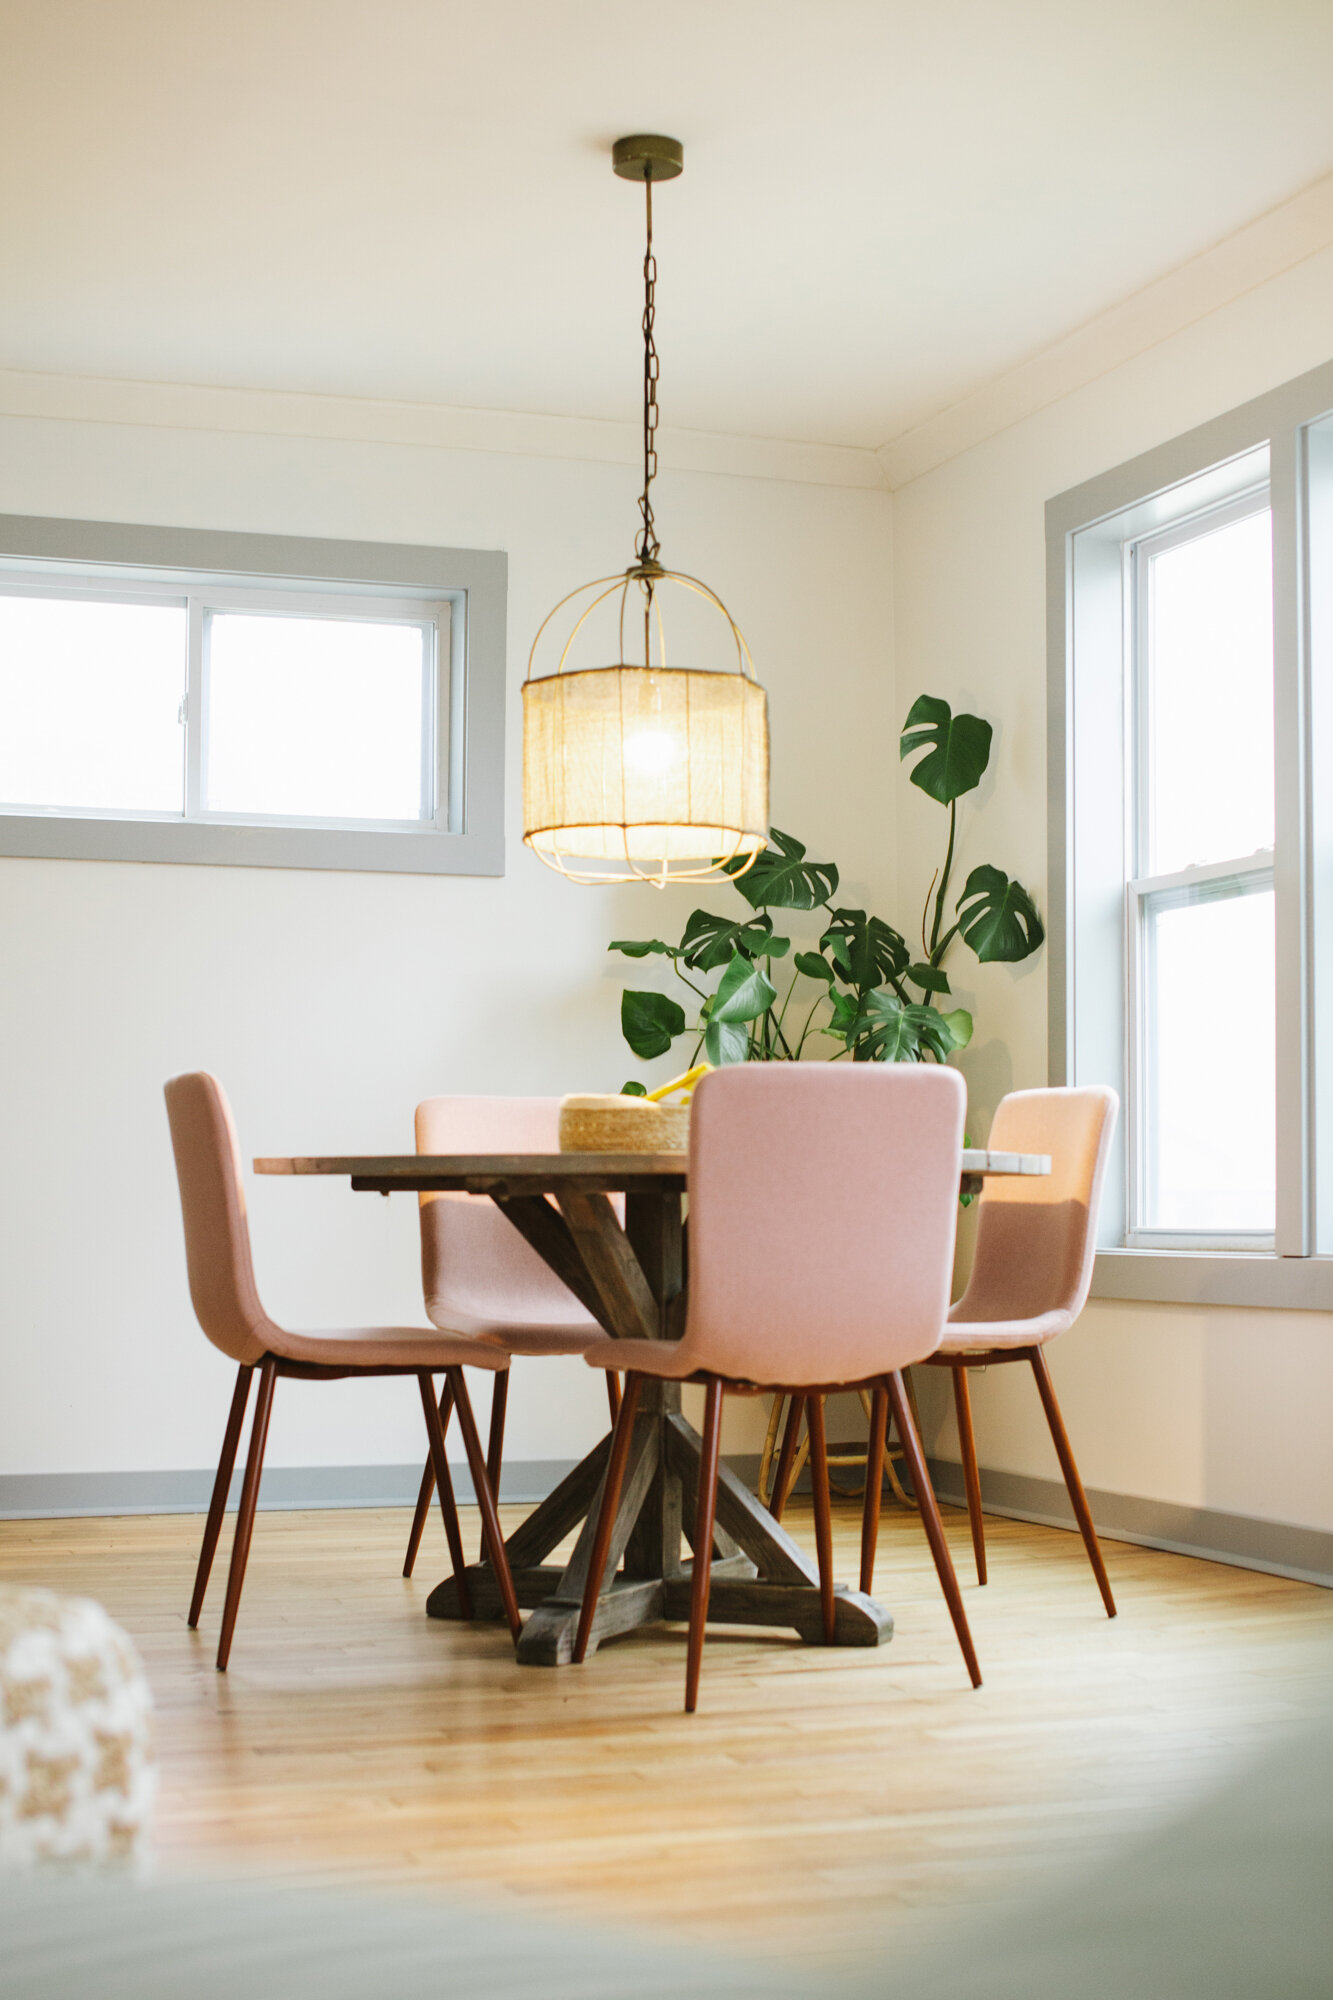 Pink was the perfect color choice for dining chairs paired with our grey teak table.